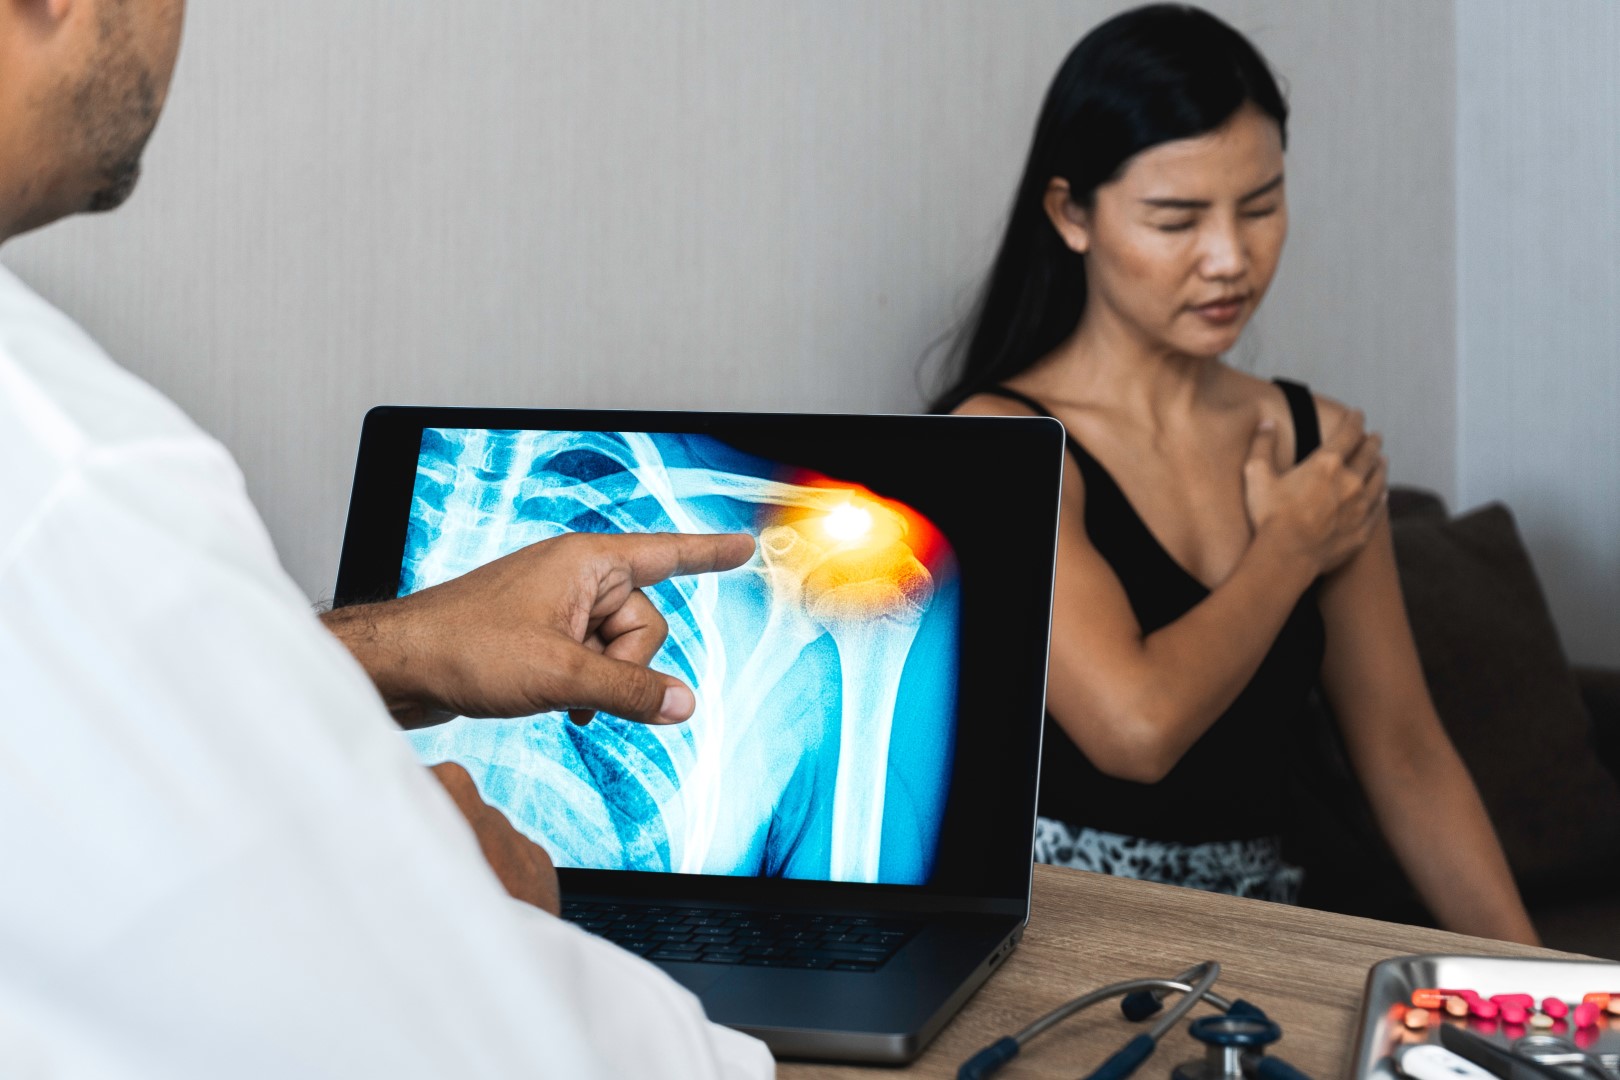 A woman holds her hand to her sore shoulder while the doctor looks at an image of her rotator cuff tear on a screen.